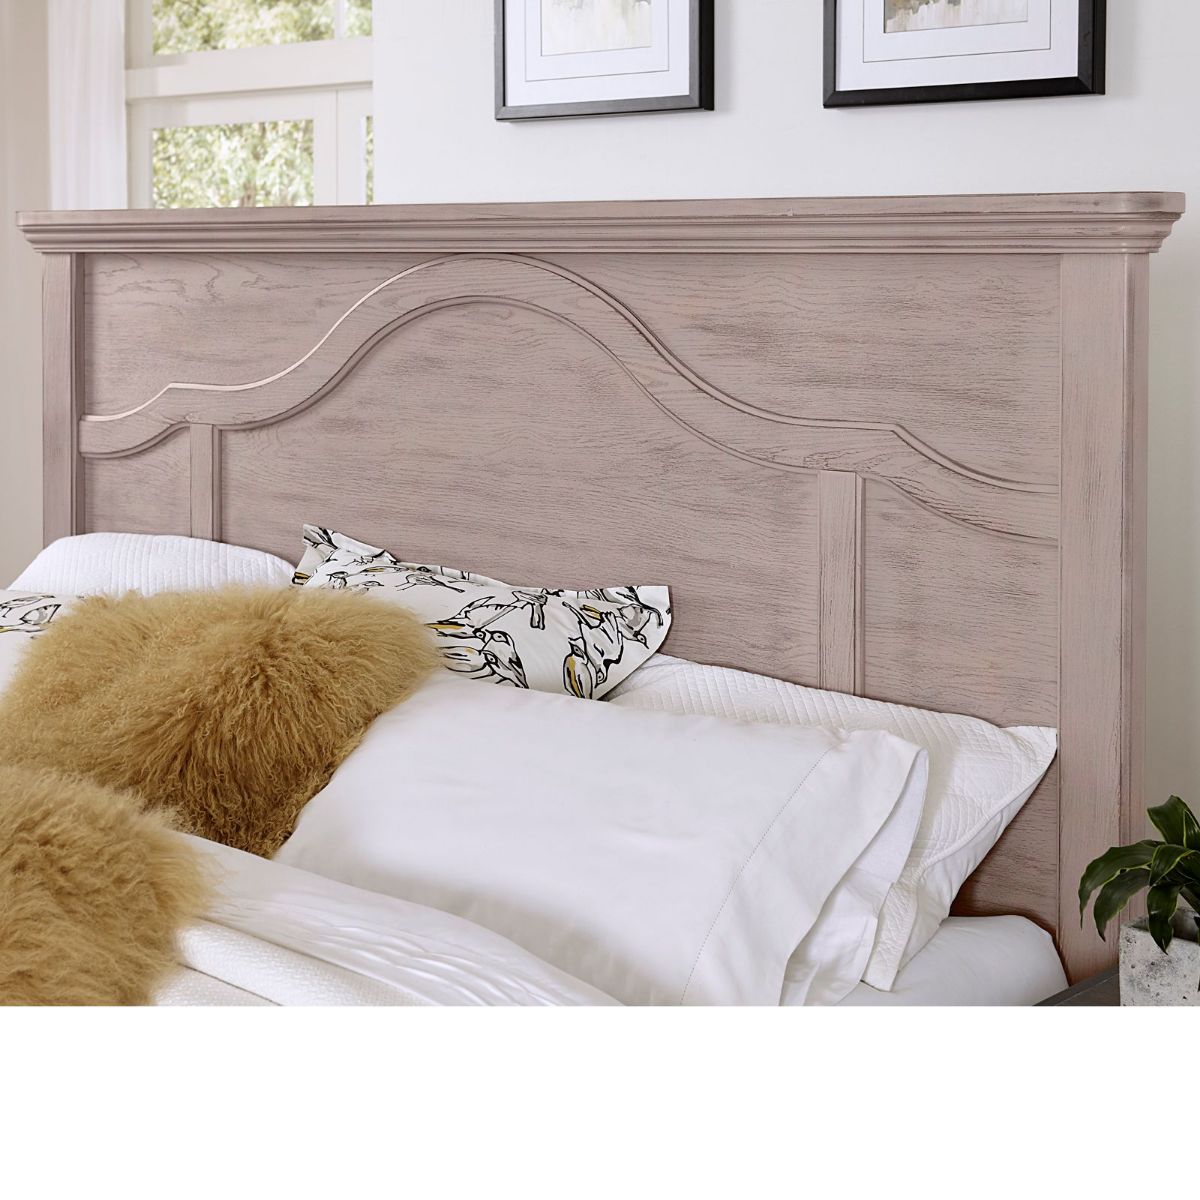 Picture of Bungalow King Mantel Bed